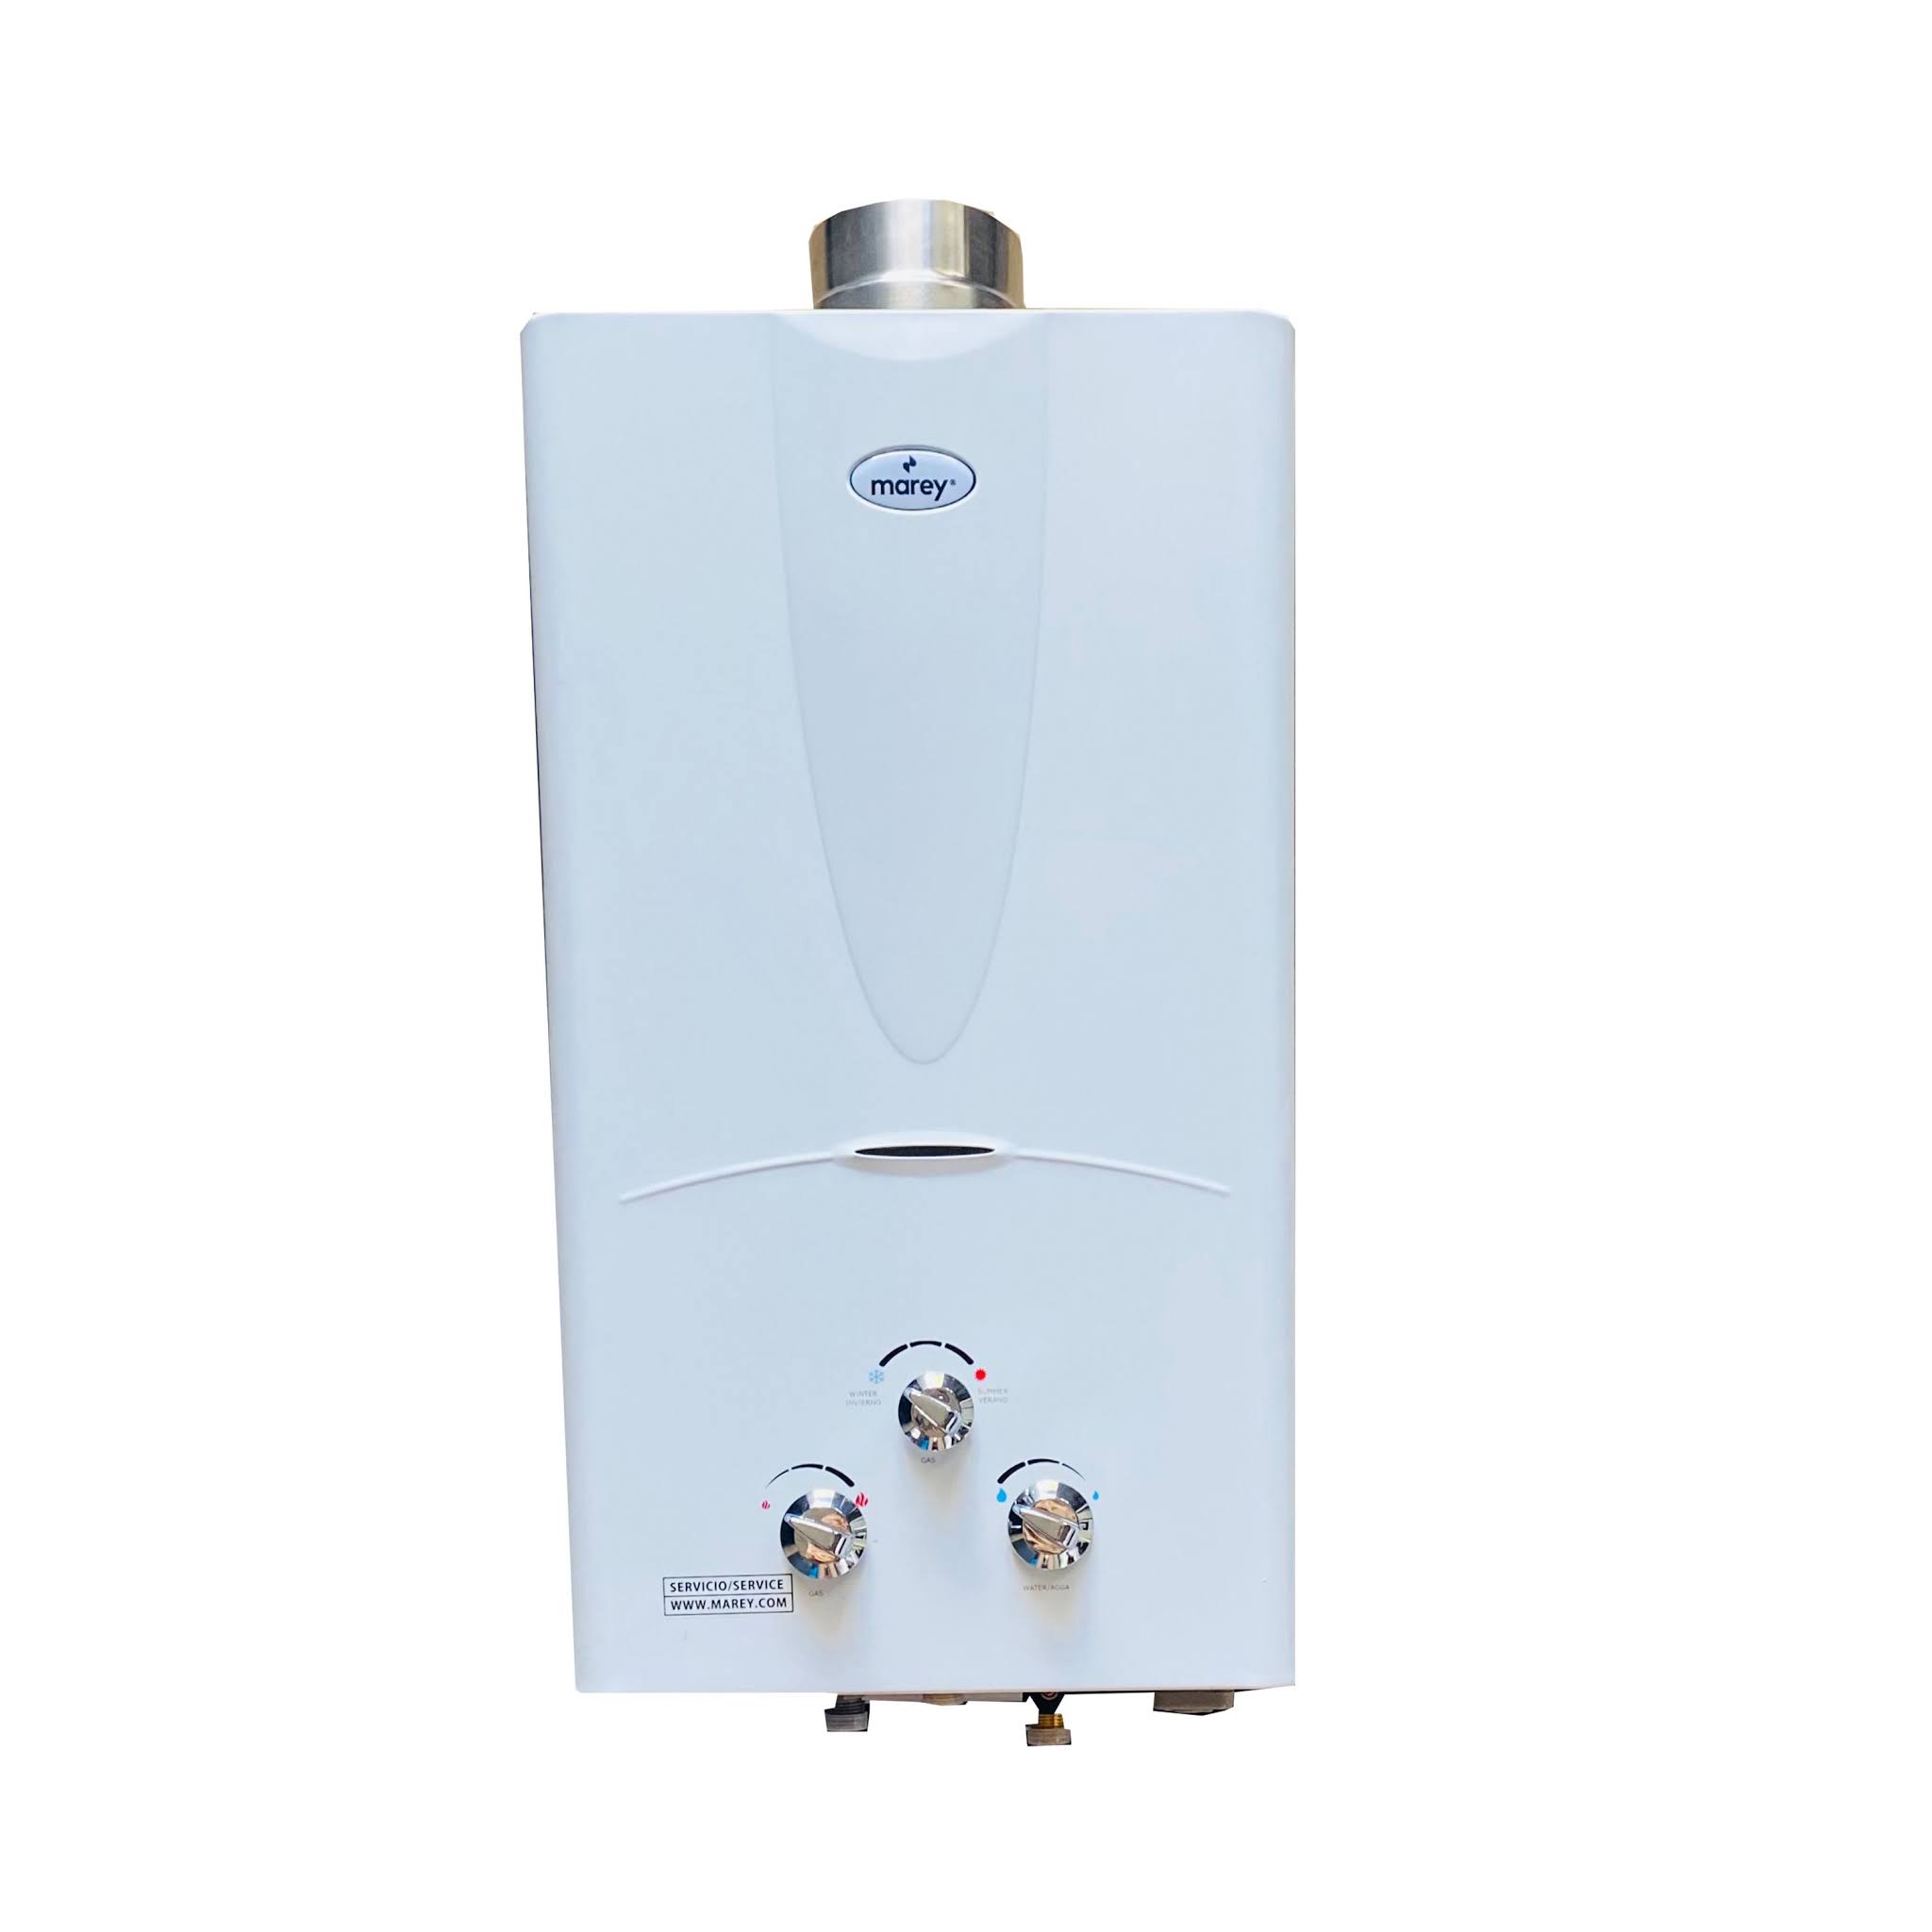 AQUAH 16L (4.23 GPM) Propane Gas Tankless Water Heater